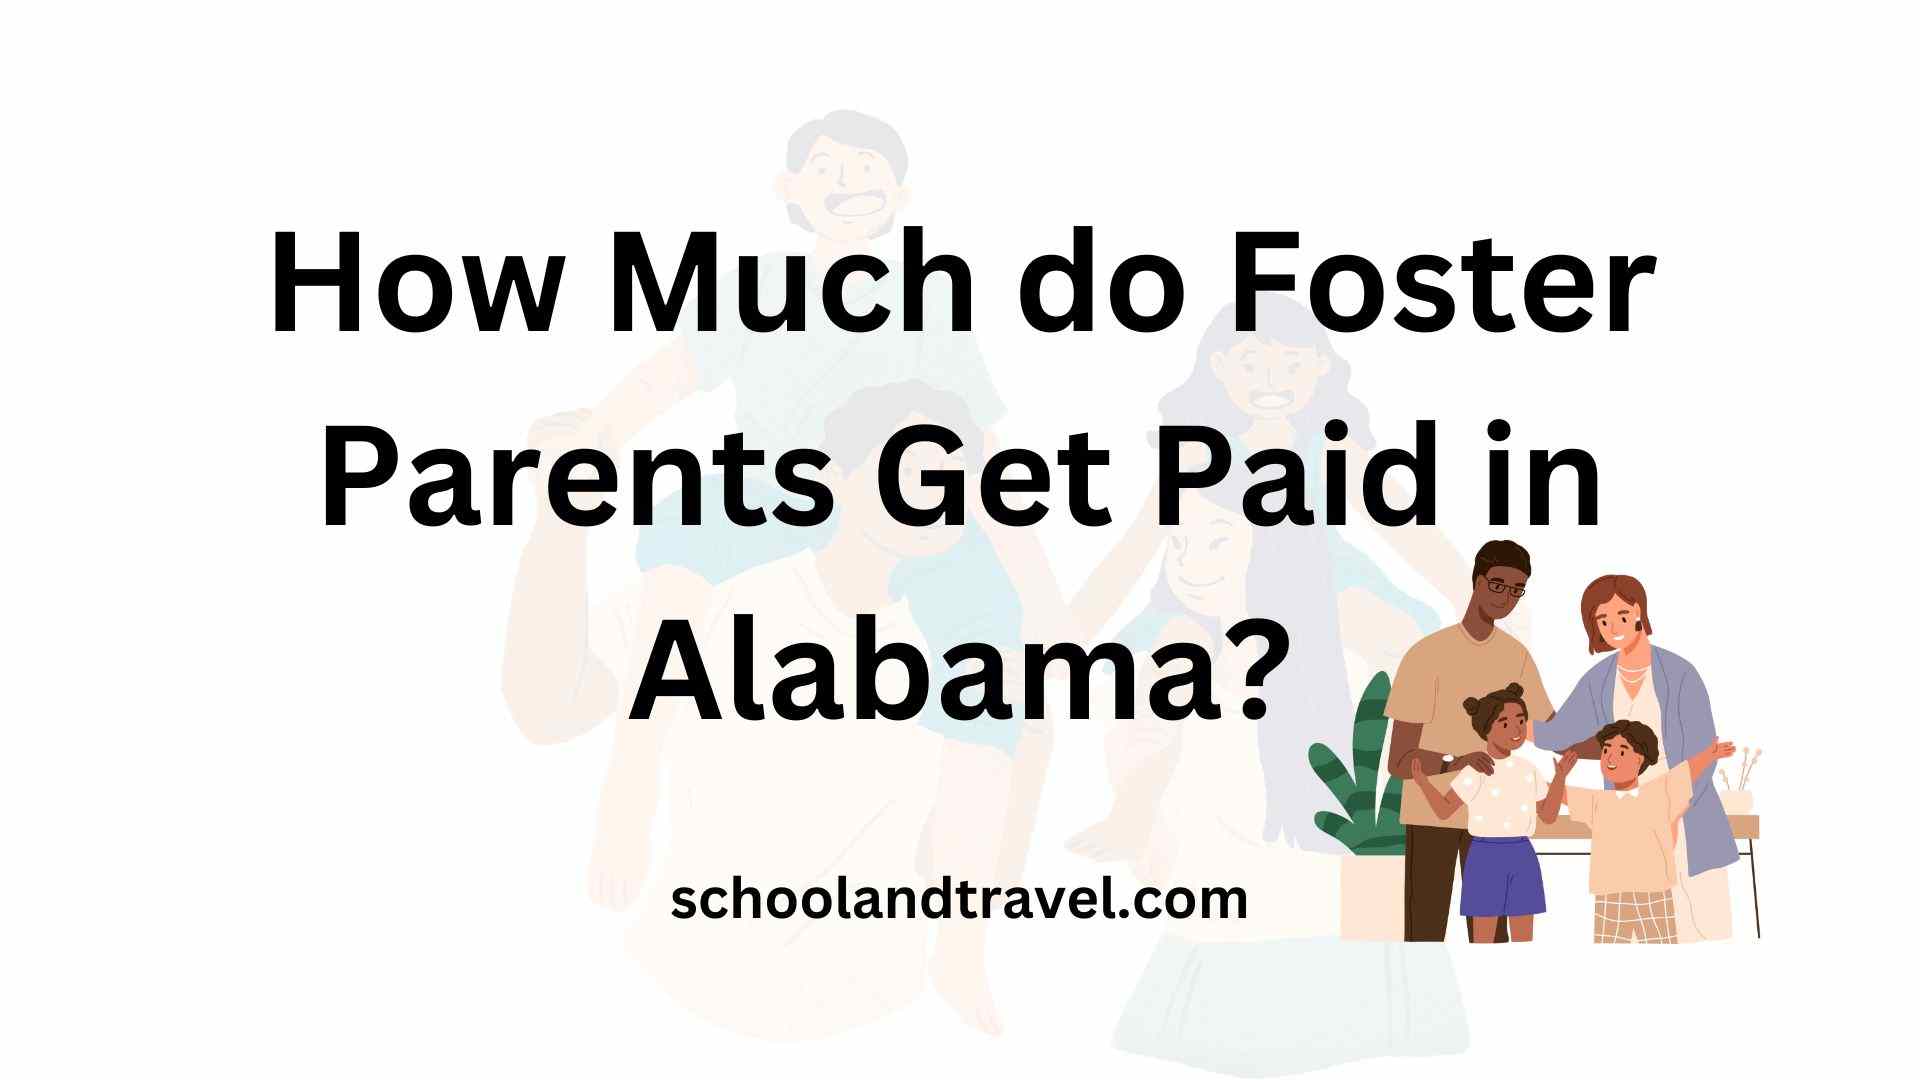 How Much do Foster Parents Get Paid in Alabama?